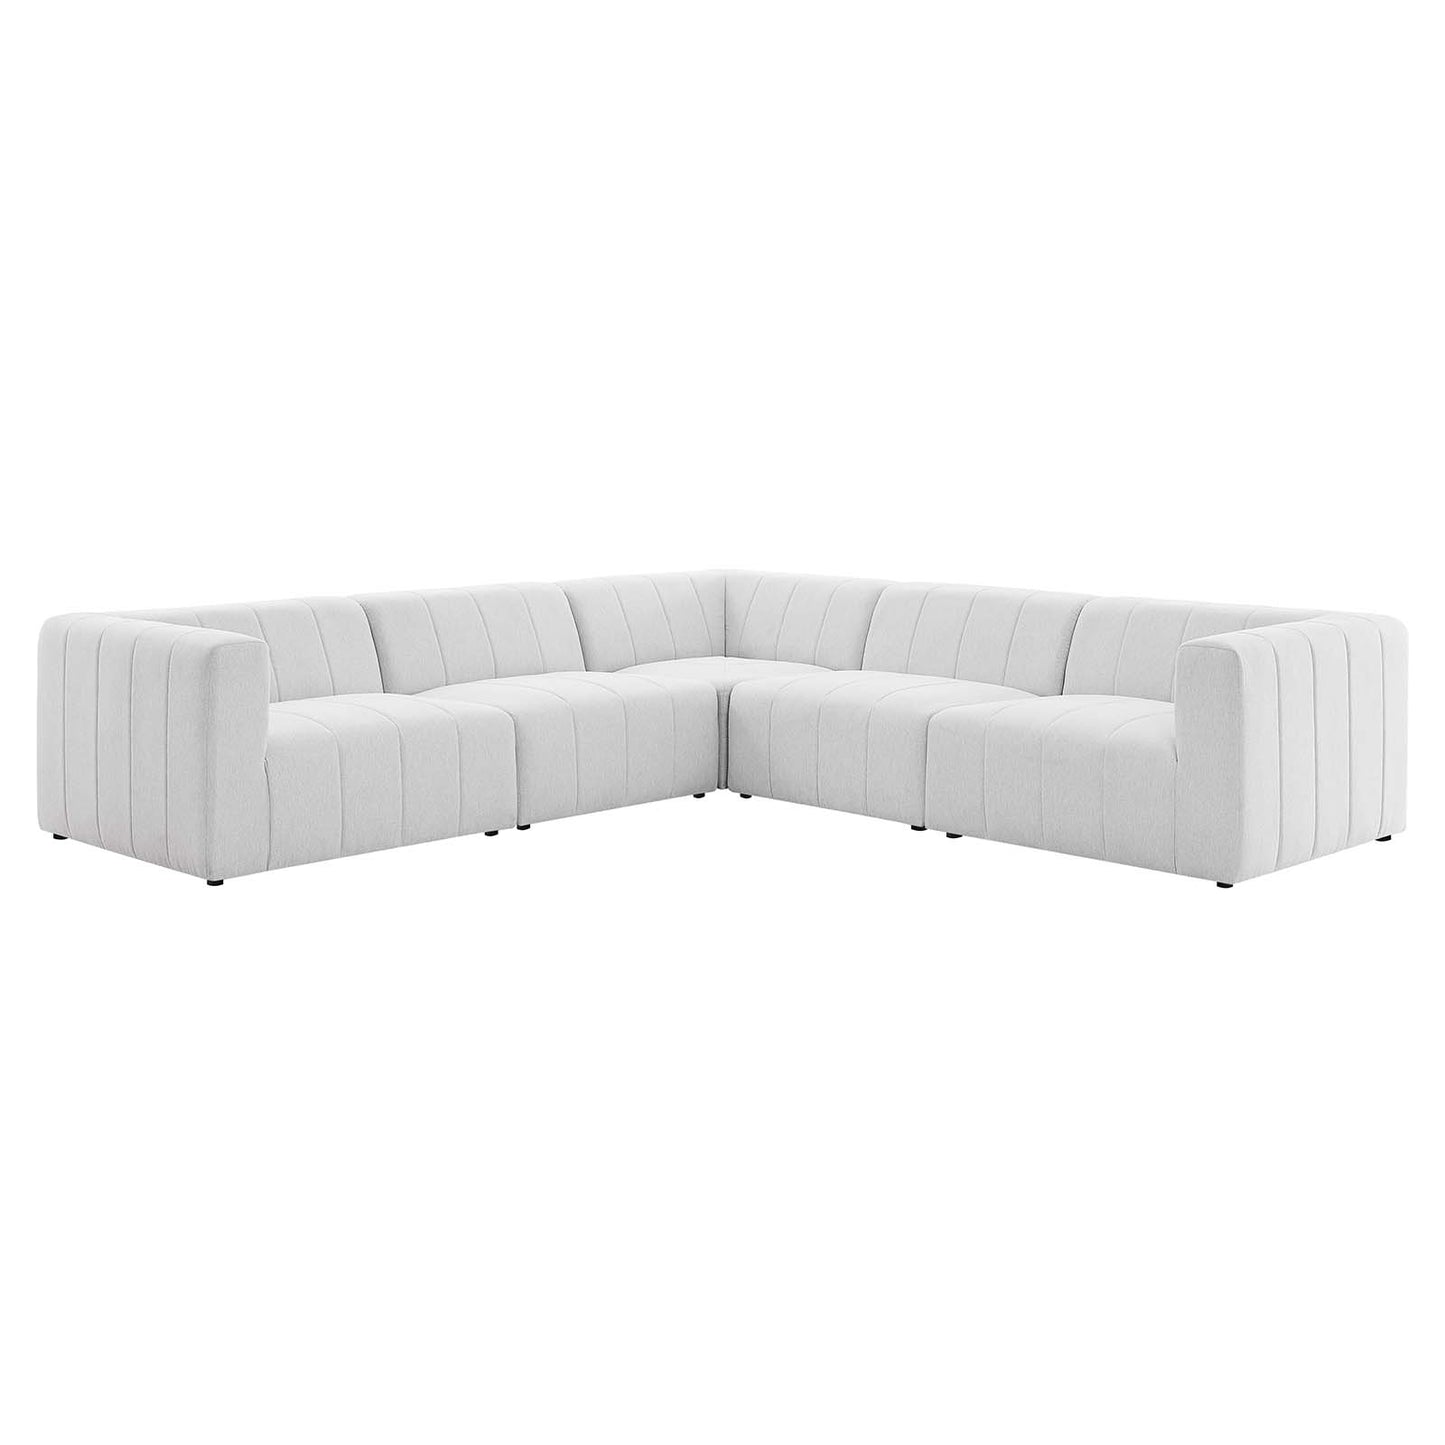 Bartlett Upholstered Fabric 5-Piece Sectional Sofa Ivory EEI-4531-IVO